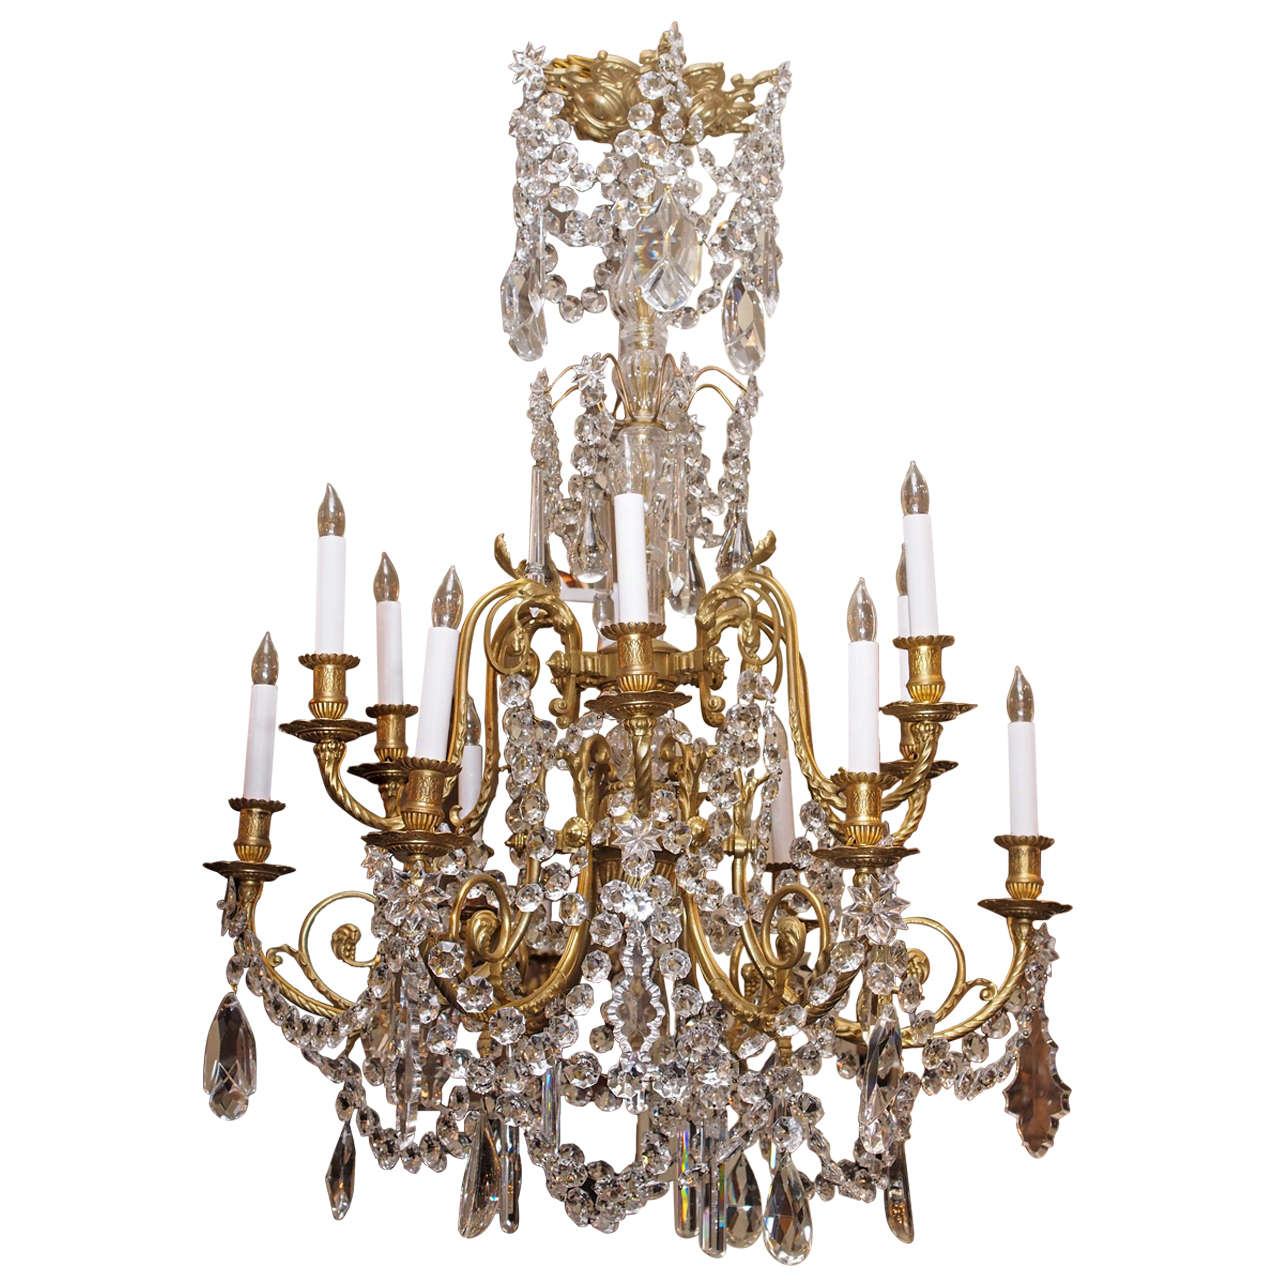 Antique French Crystal and Bronze Baccarat Chandelier, circa 1890-1900